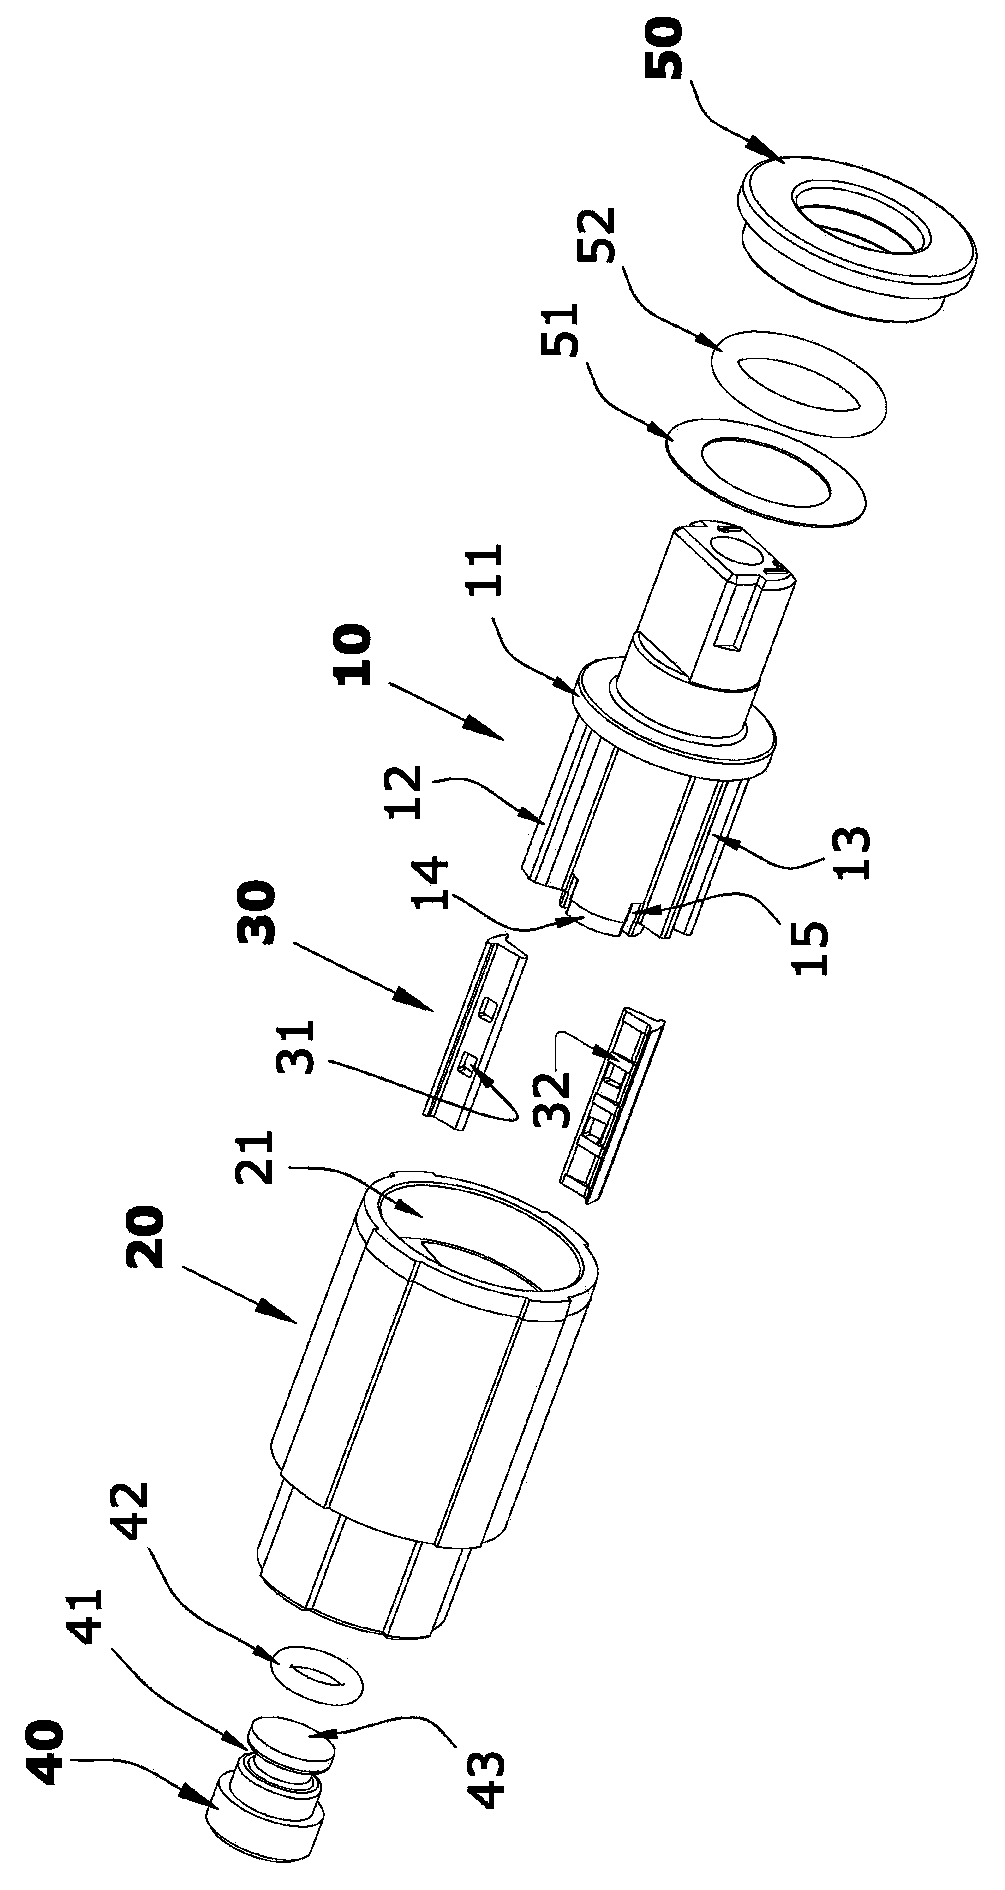 Rotary buffer with adjustable damping magnitude